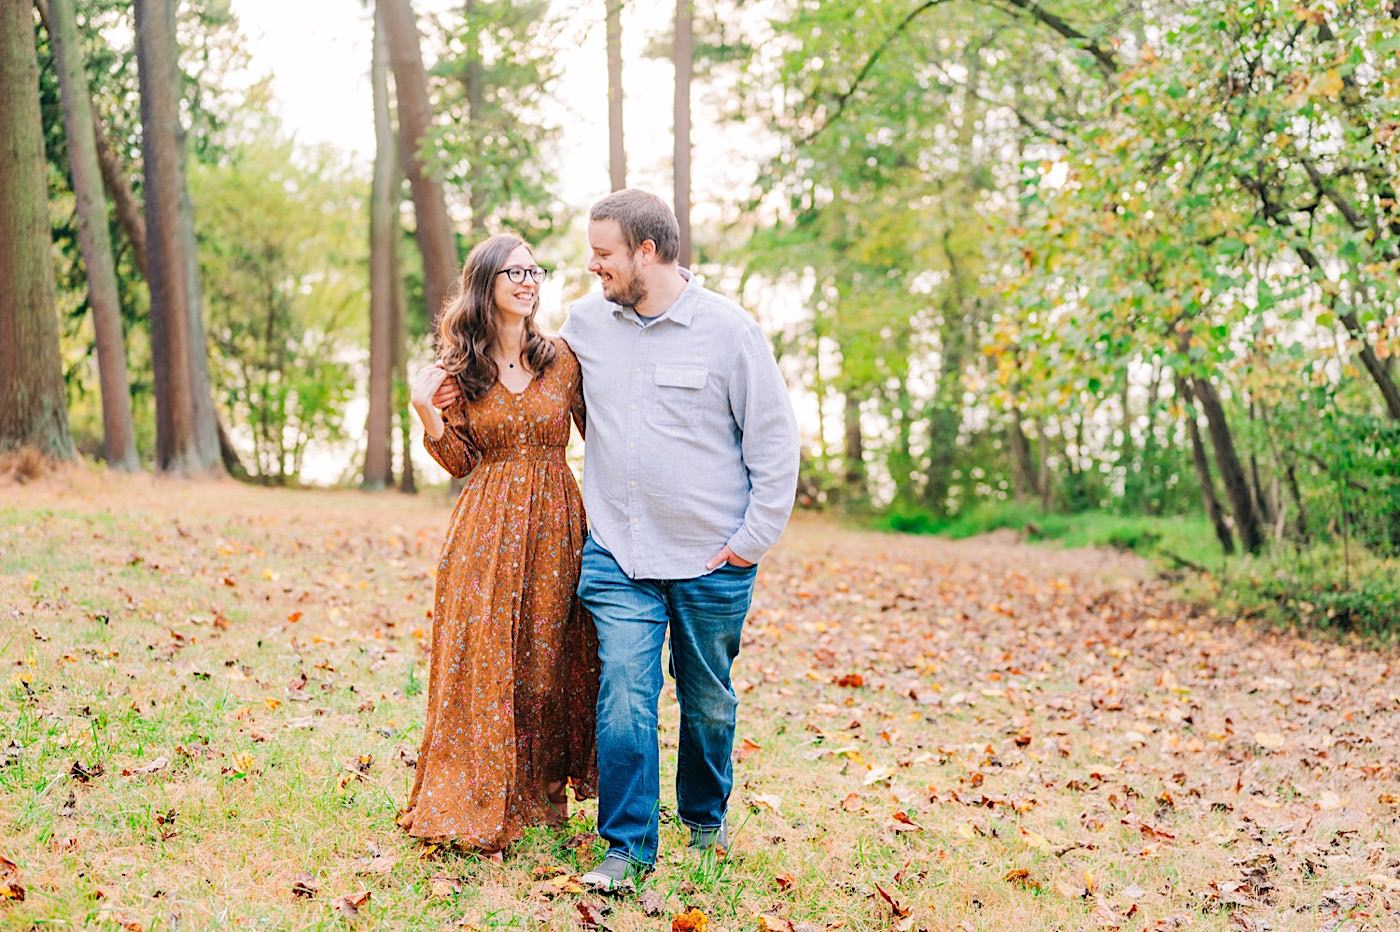 Southern Maryland Wedding Photographer, Kyra Gustwick, Couple at Loch Raven Reservoir, Loch Raven Reservoir Engagement Session, Baltimore MD Photographer